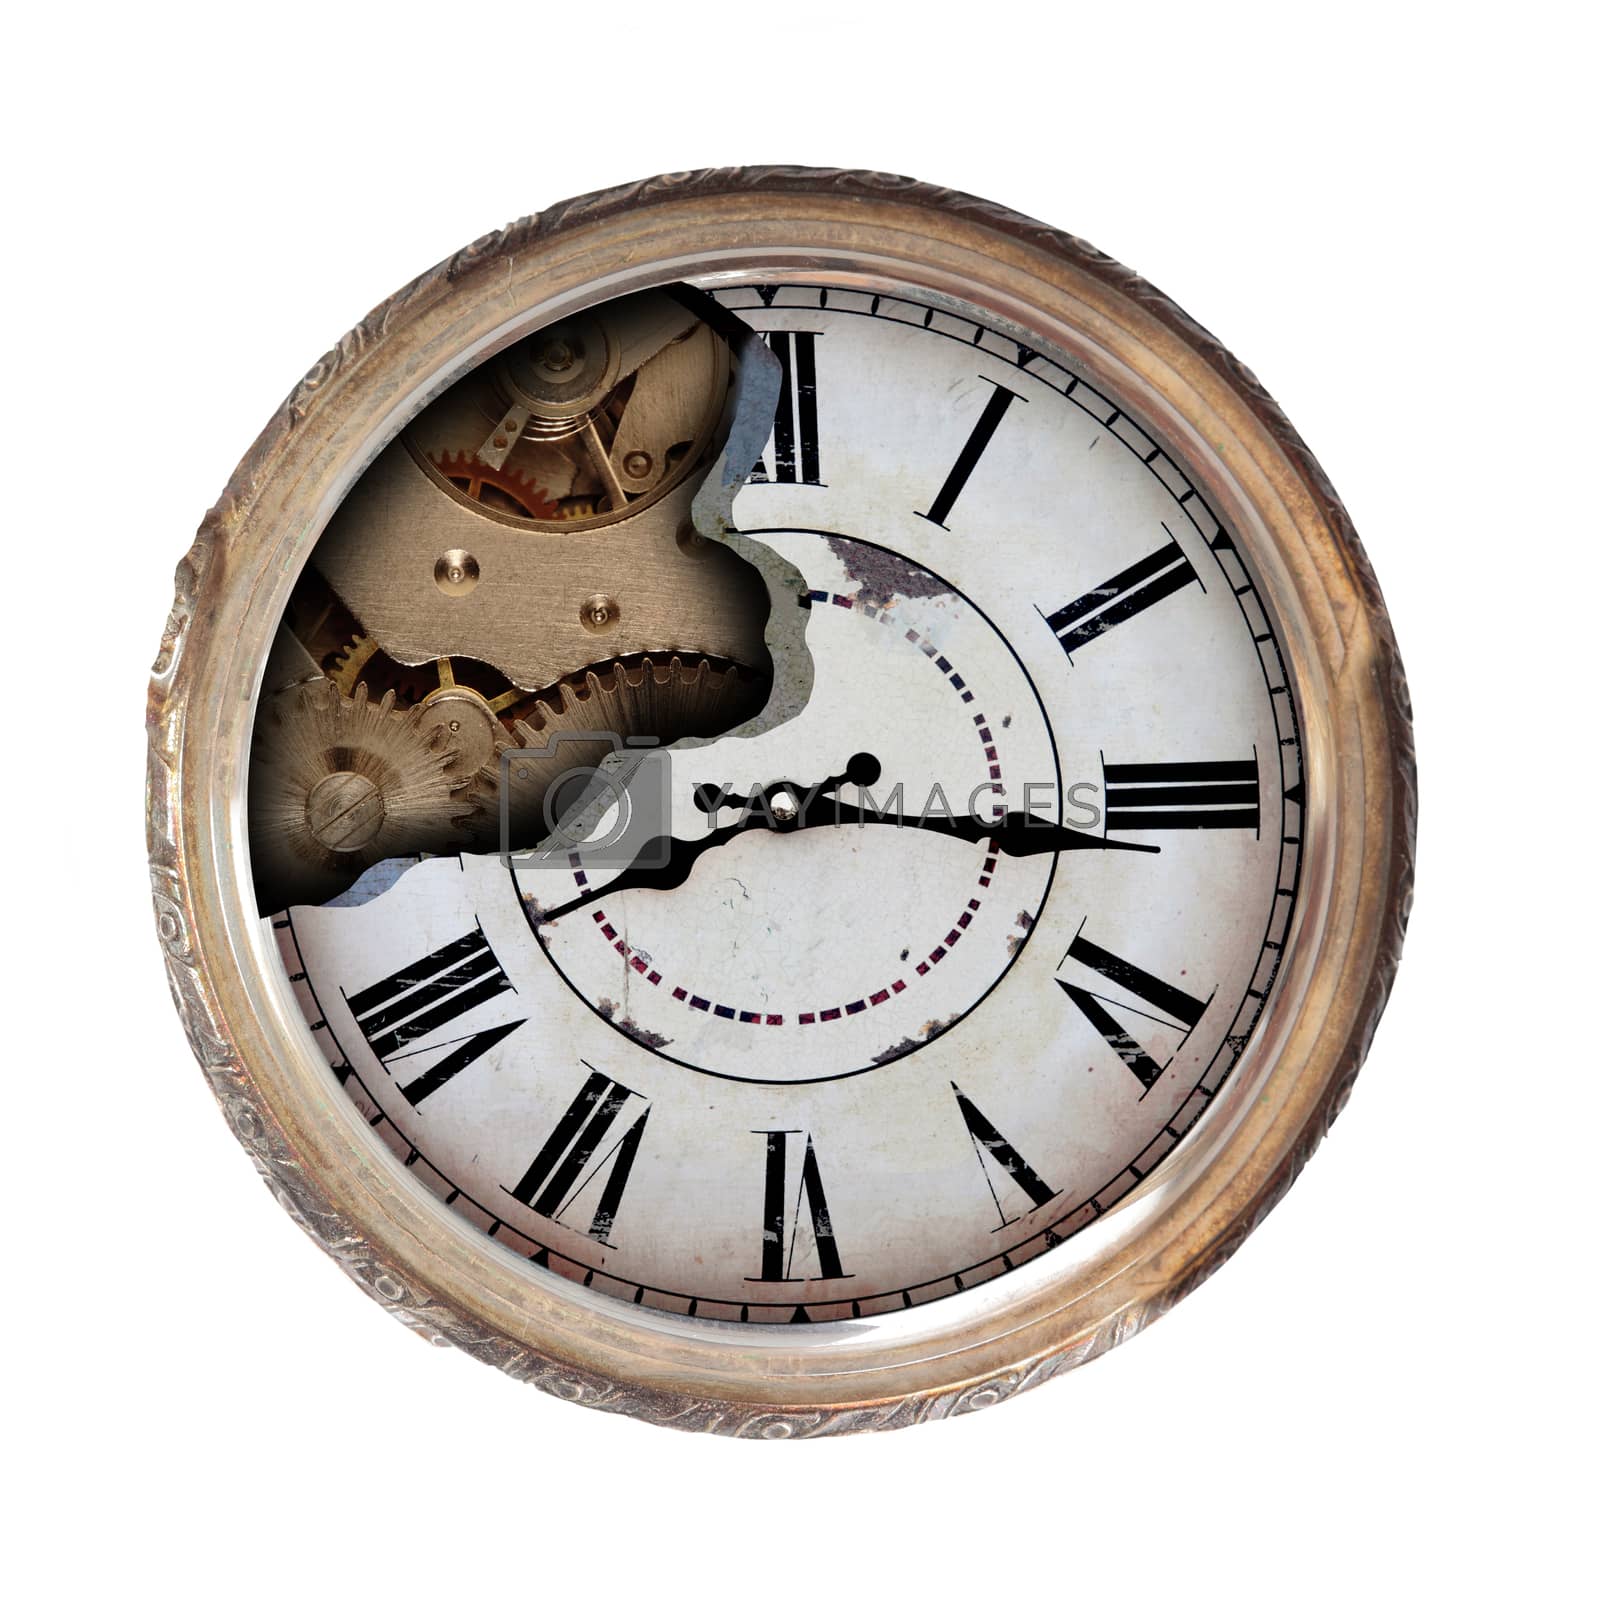 Royalty free image of old clock by erllre